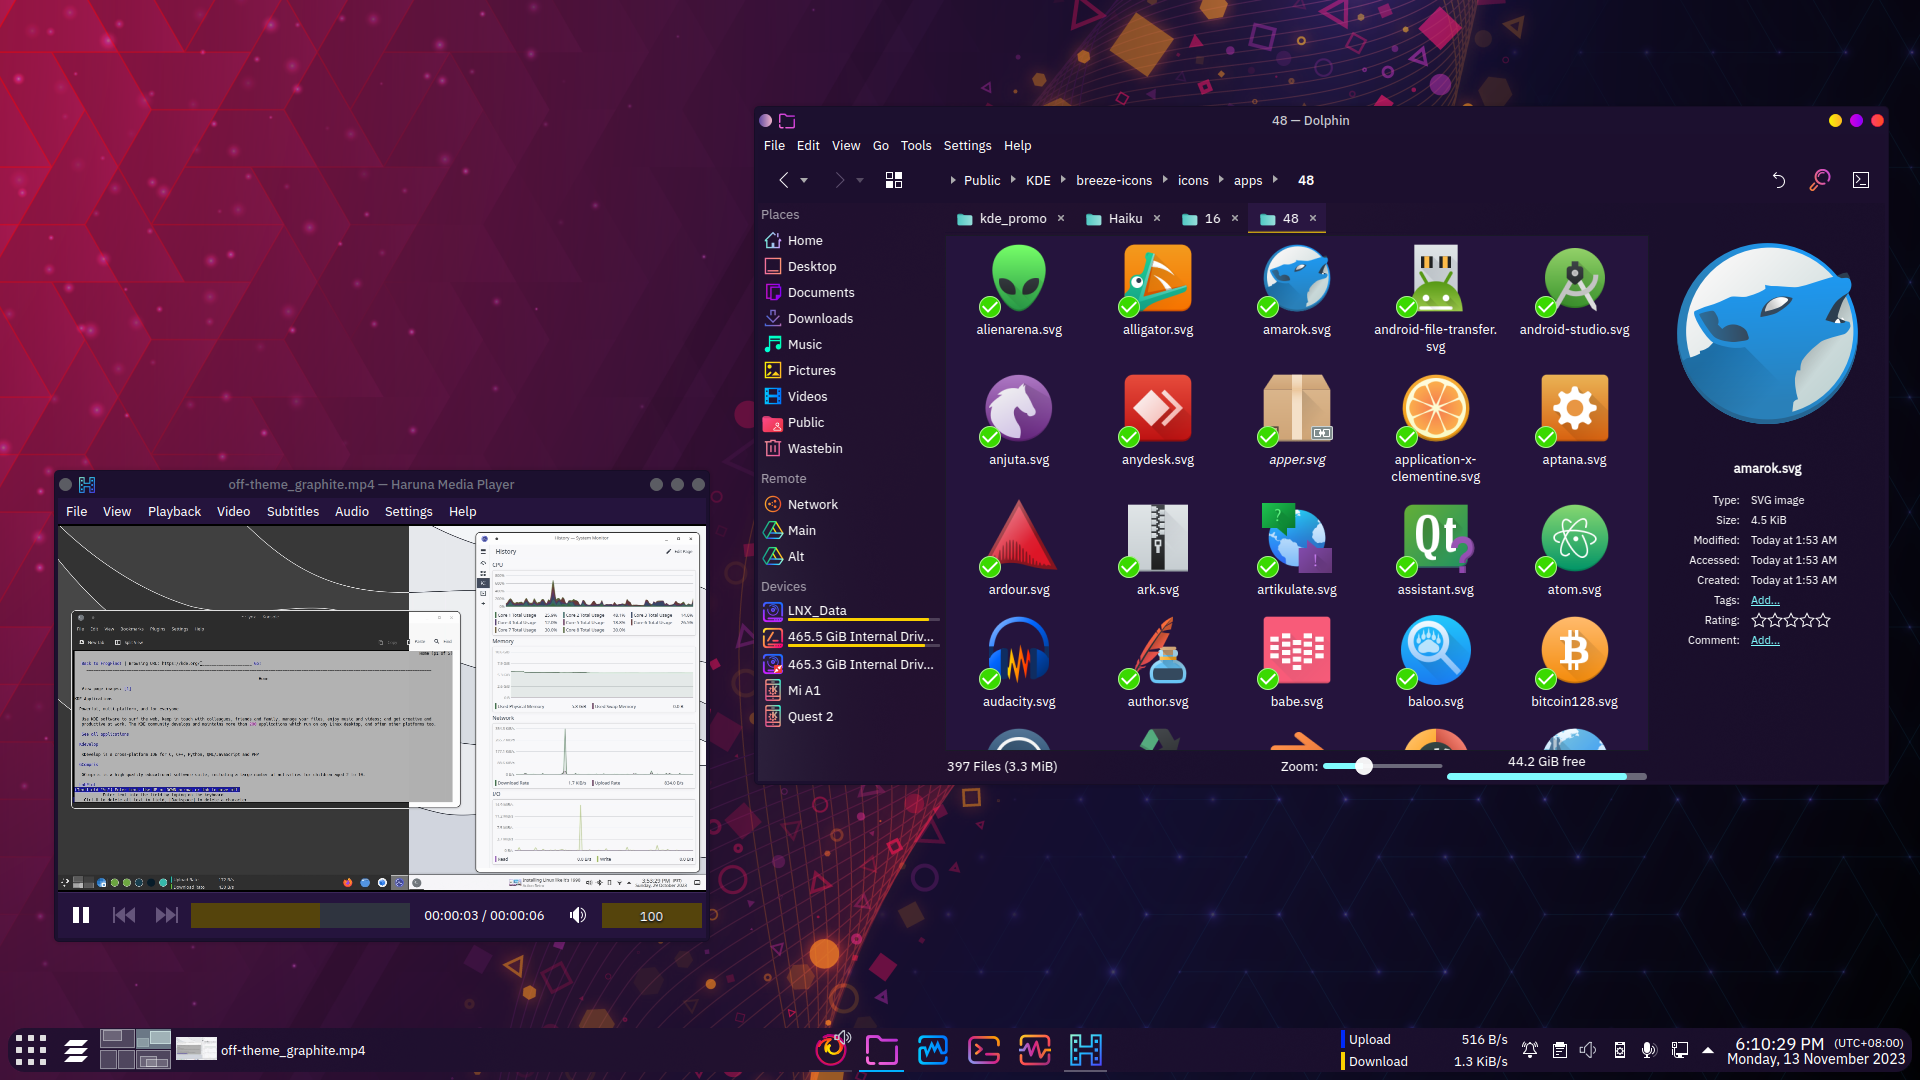 The Plasma desktop themed with Shades of Purple